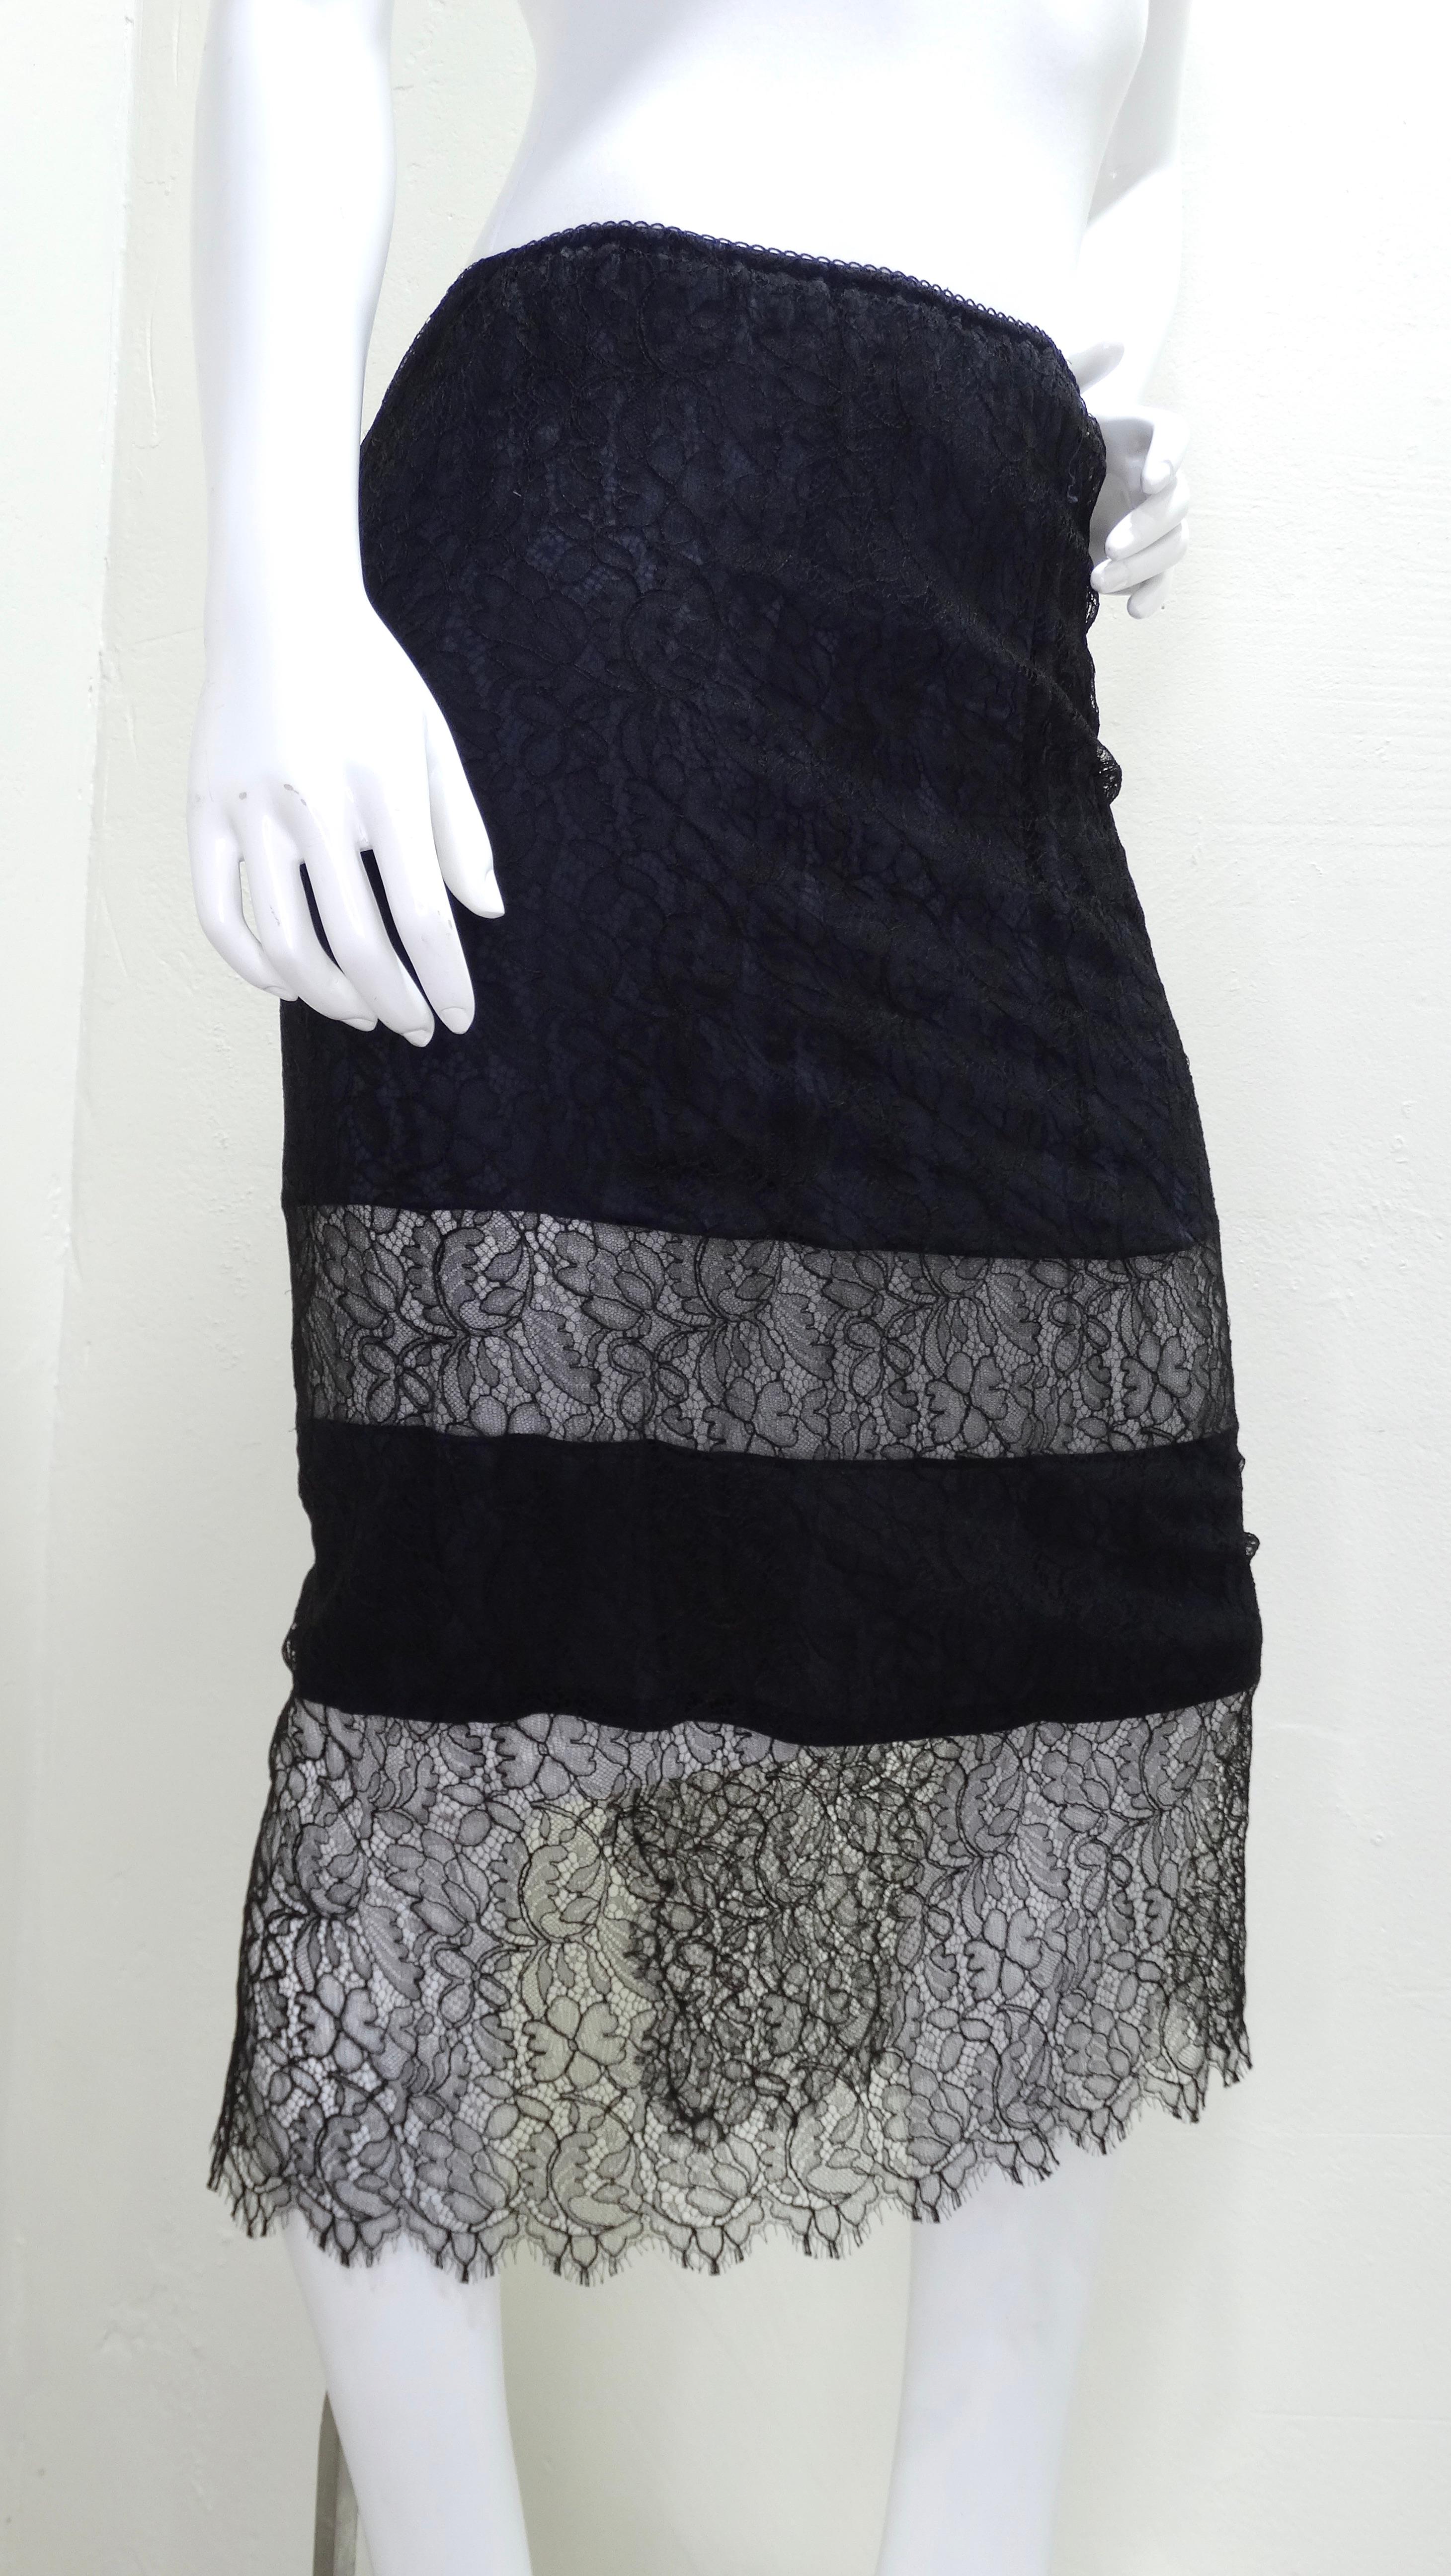 Chanel Runway Black Lace Midi Skirt In Excellent Condition For Sale In Scottsdale, AZ